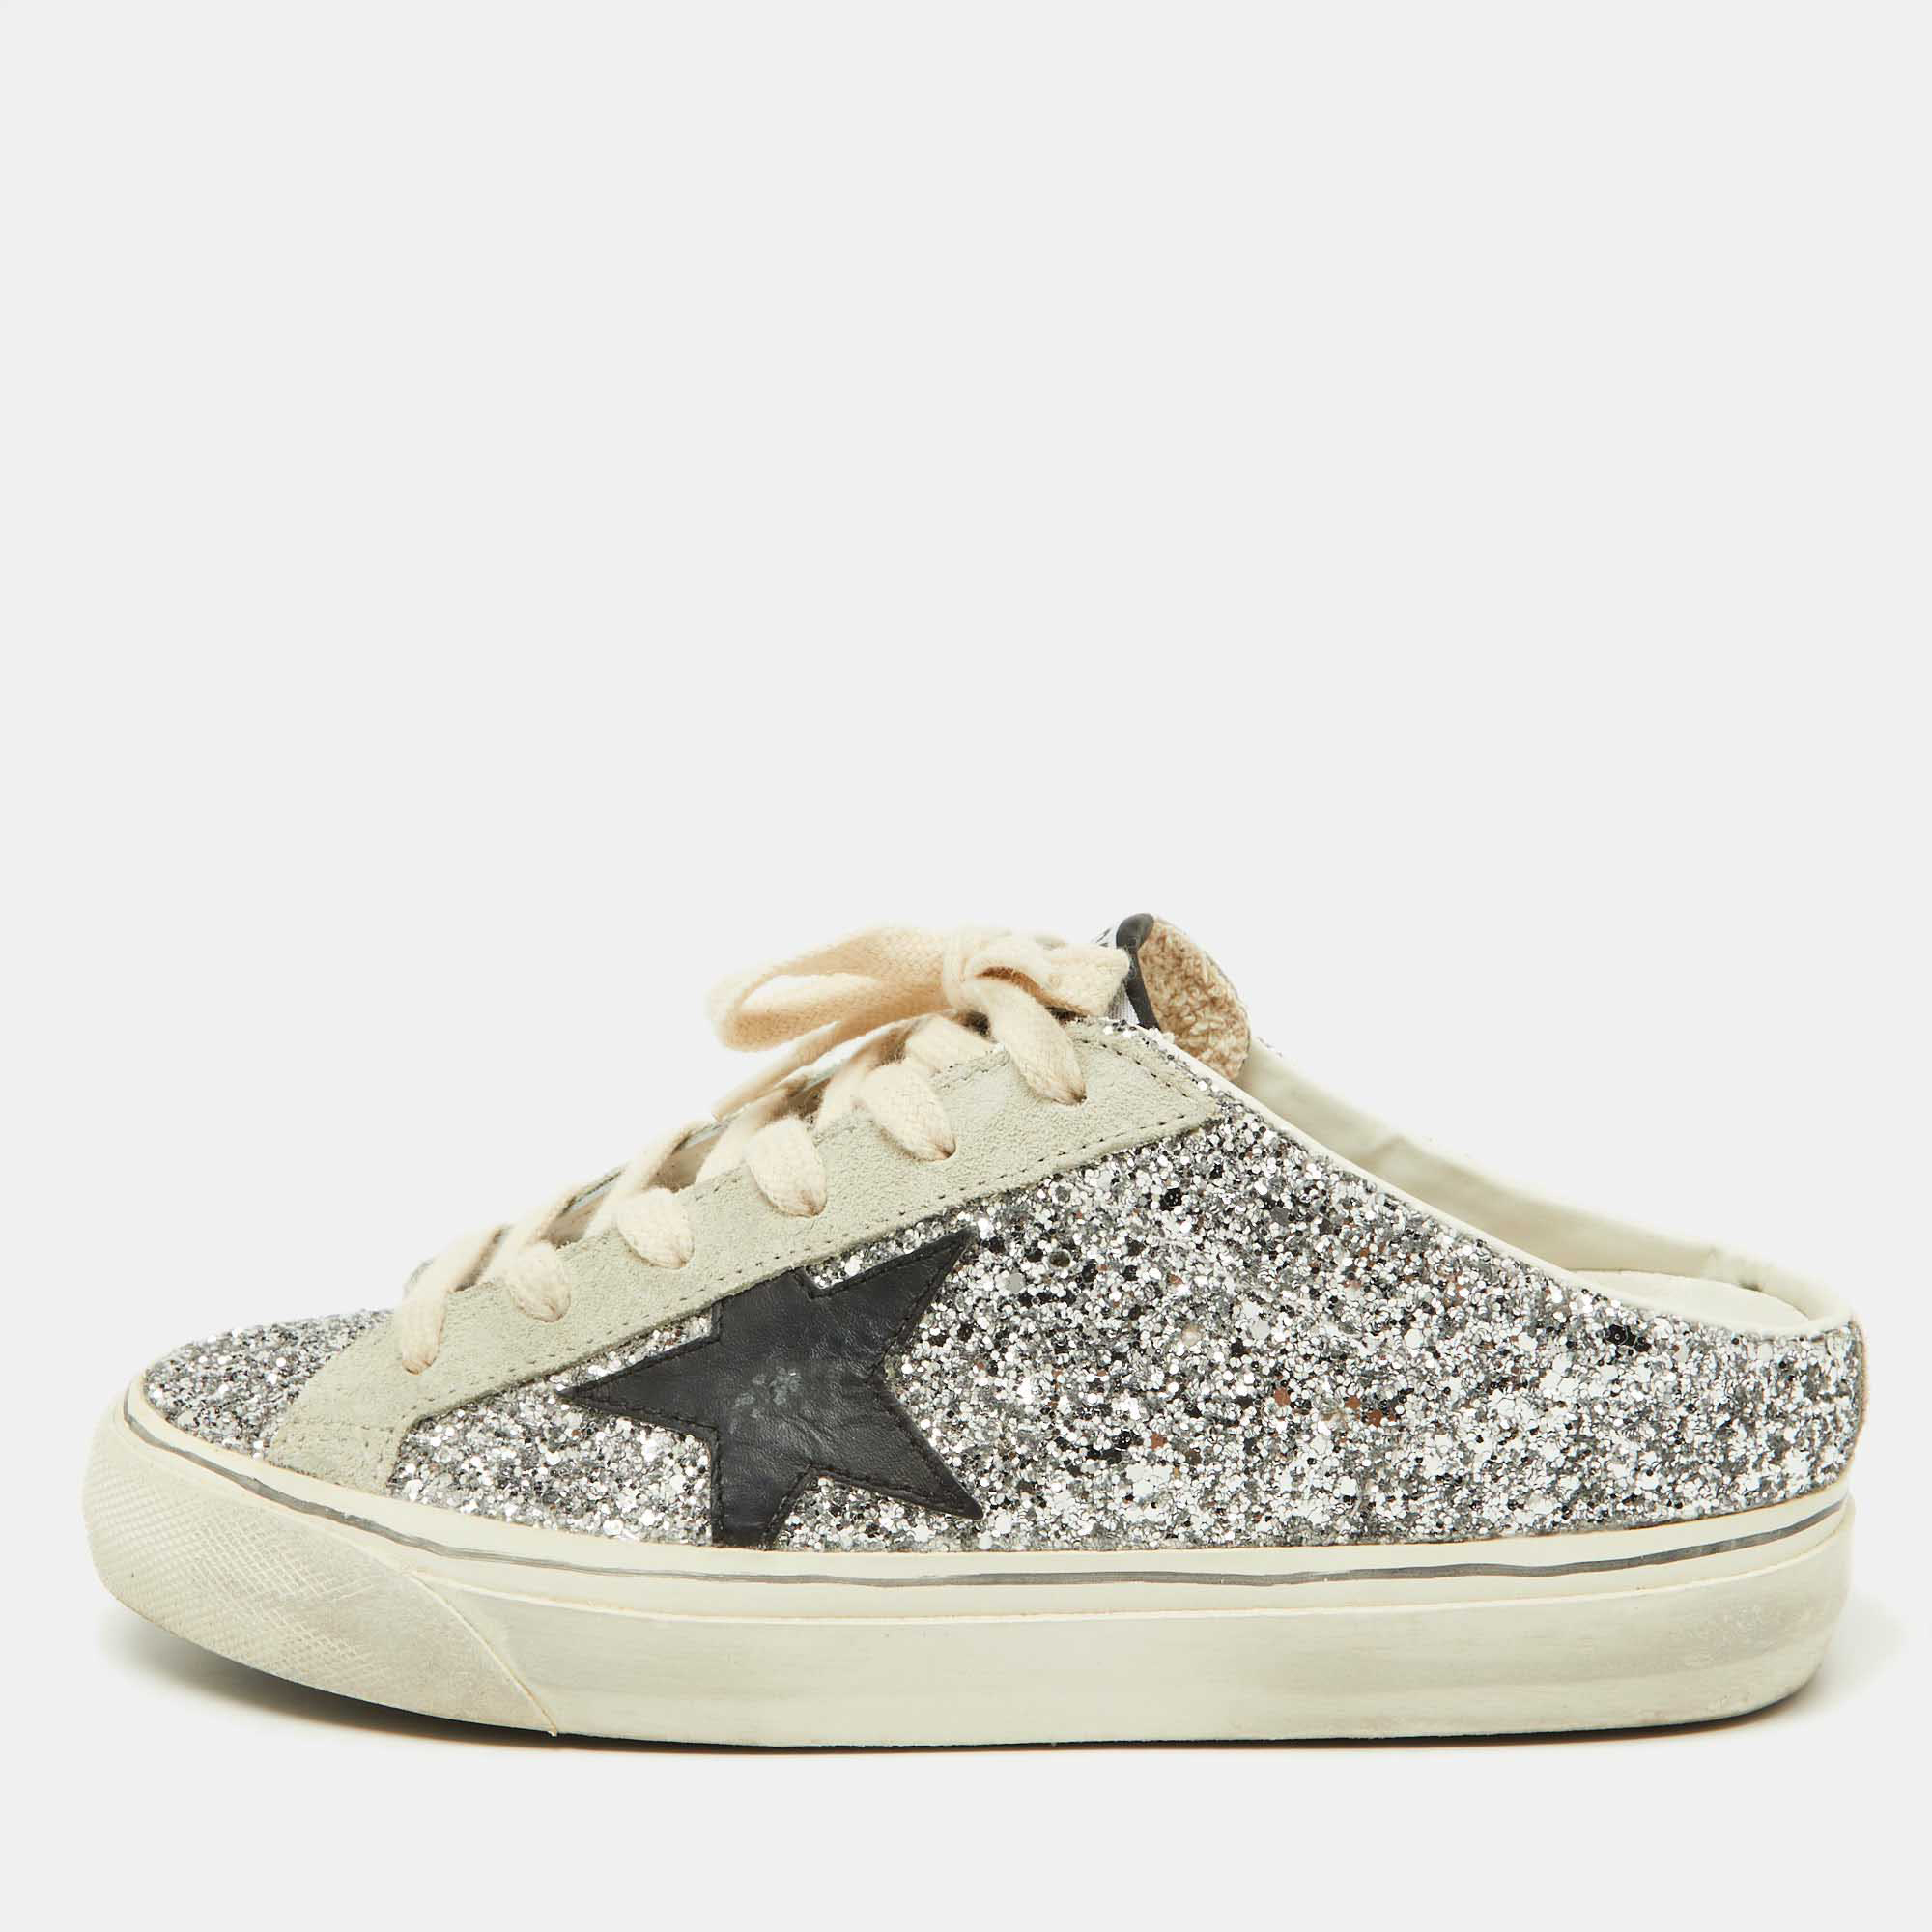 

Golden Goose Silver Glitter and Suede Super Star Sabot Mule Sneakers Size